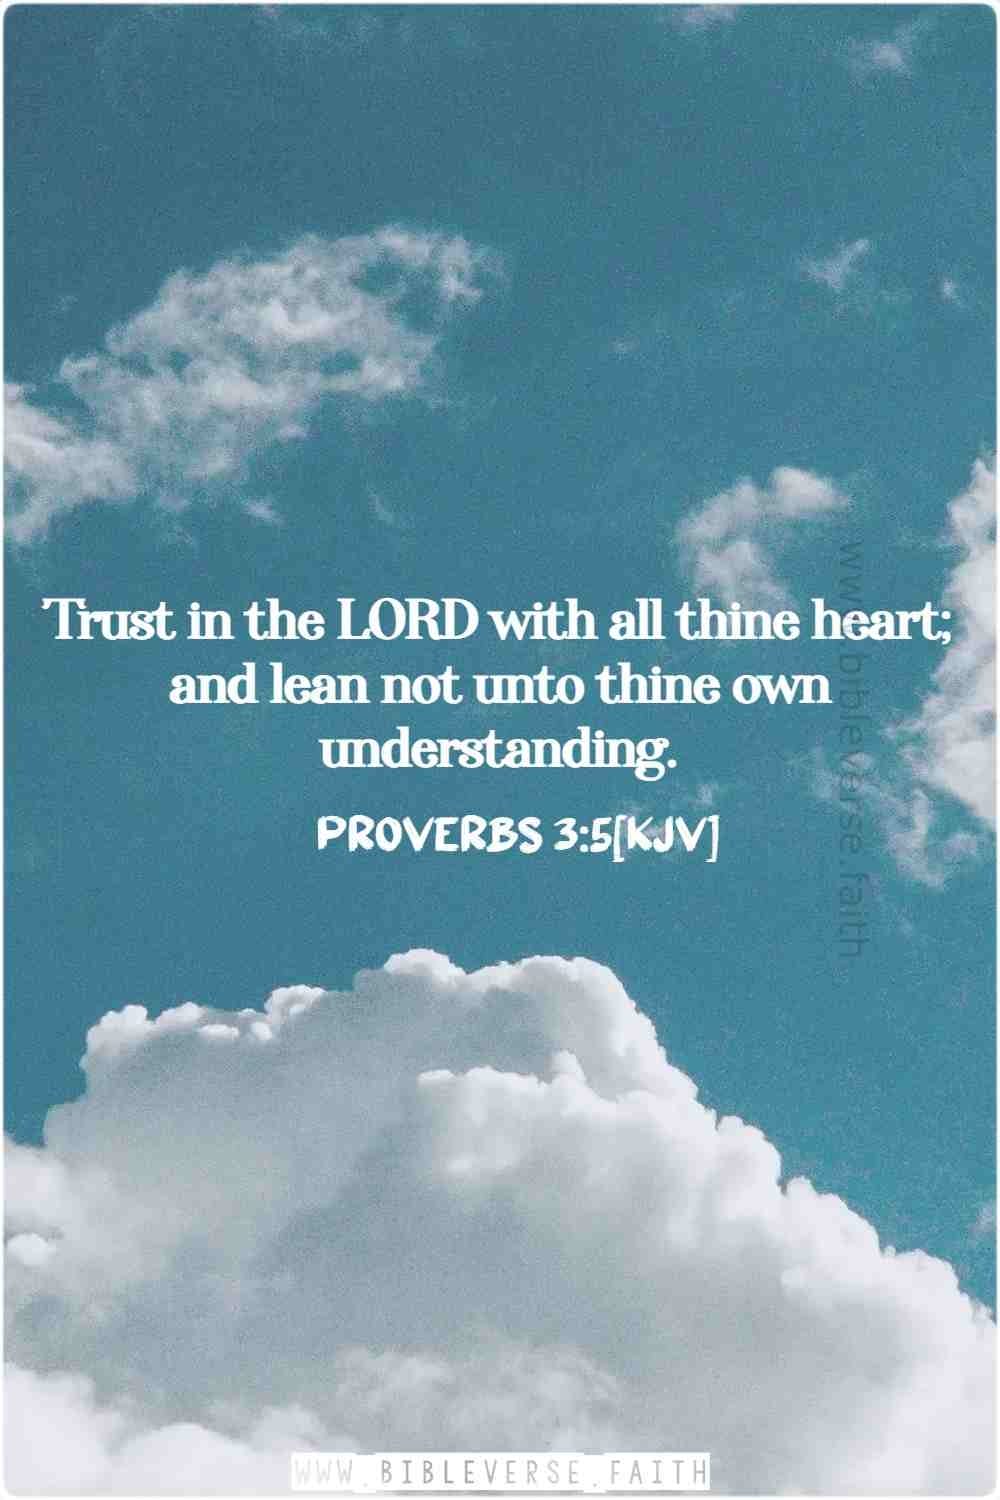 proverbs 3 5[kjv] bible verses about trusting others